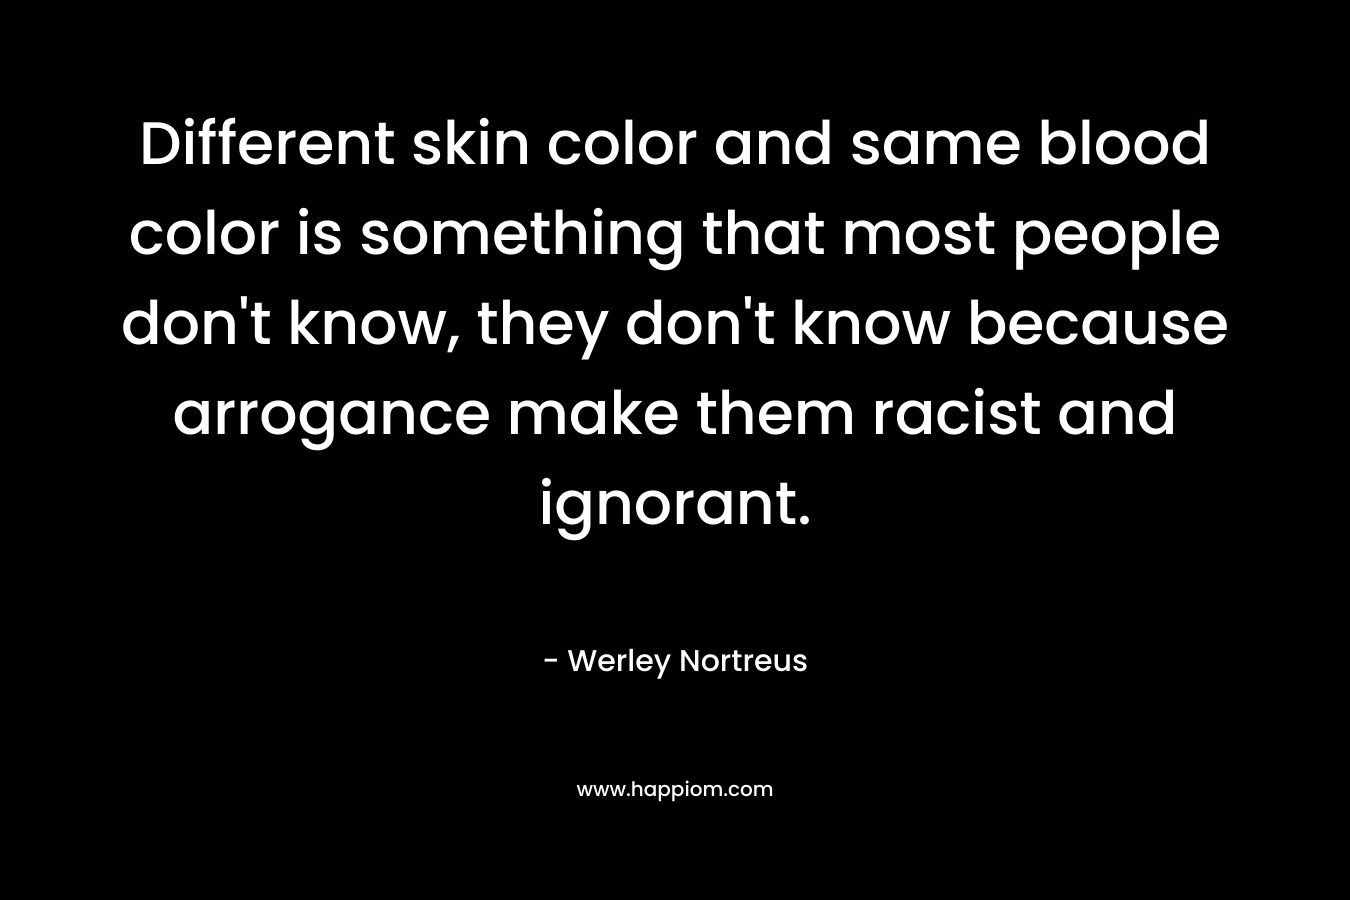 Different skin color and same blood color is something that most people don't know, they don't know because arrogance make them racist and ignorant.